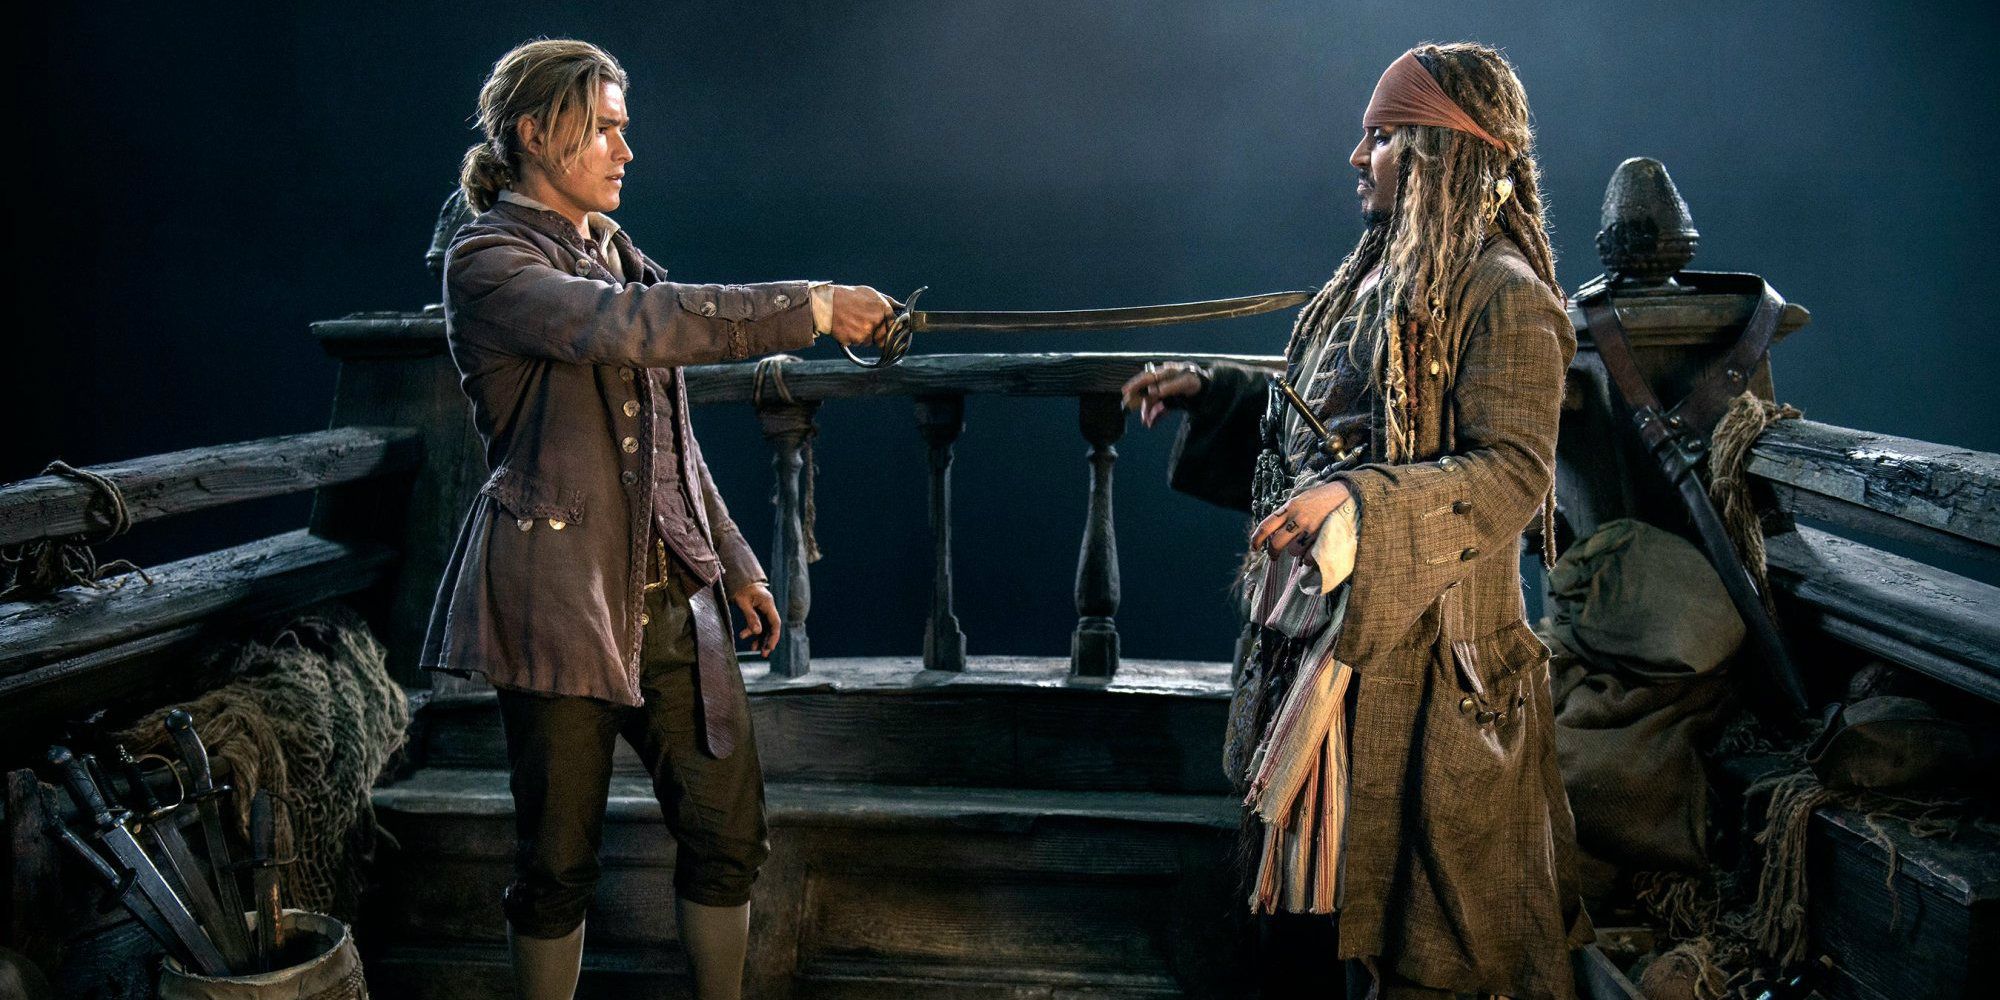 Pirates of the Caribbean 5 Early Reviews: A Pirate’s Life for Me?